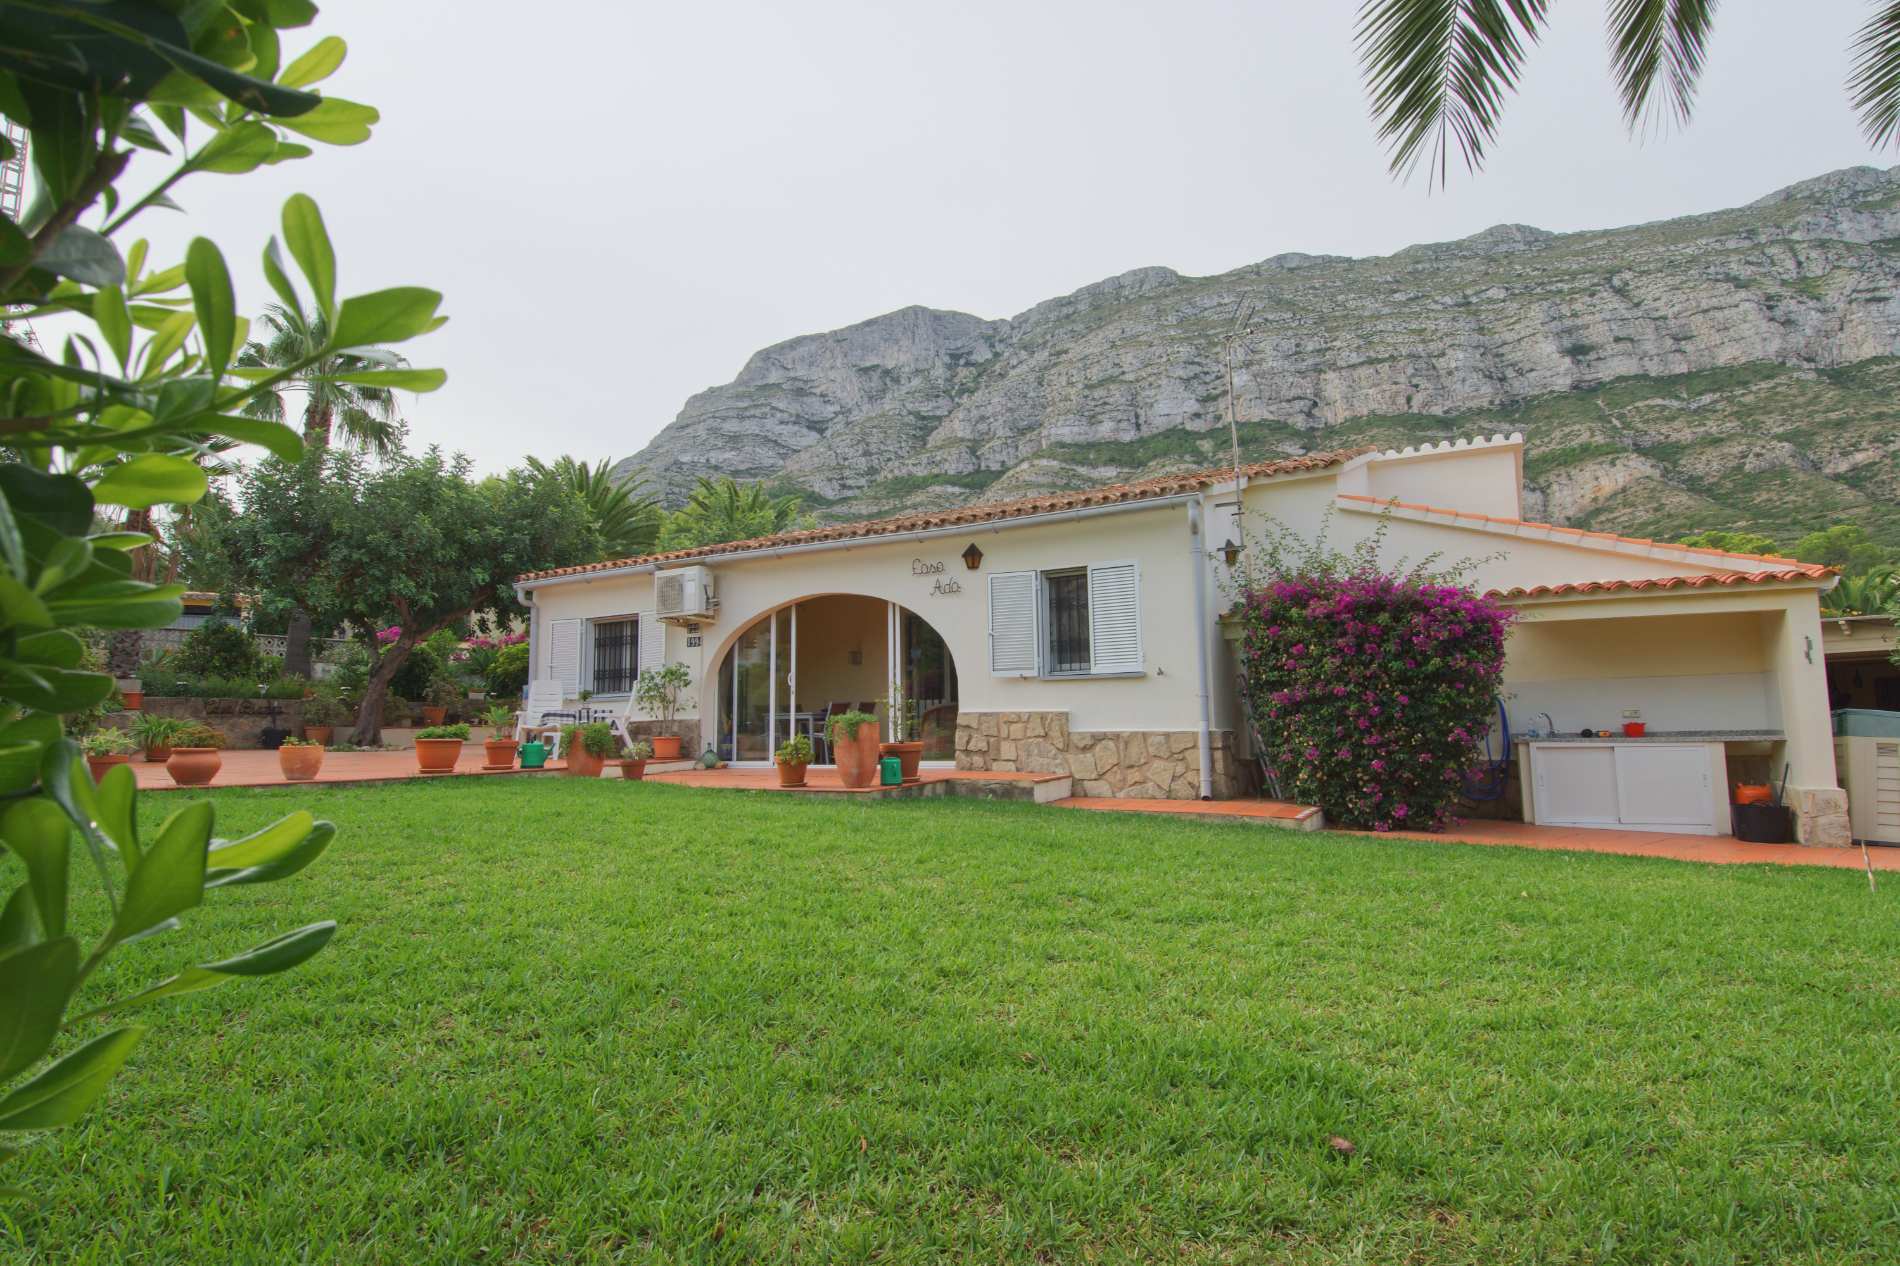 Villa in tranquil neighbourhood with views to the Montgo